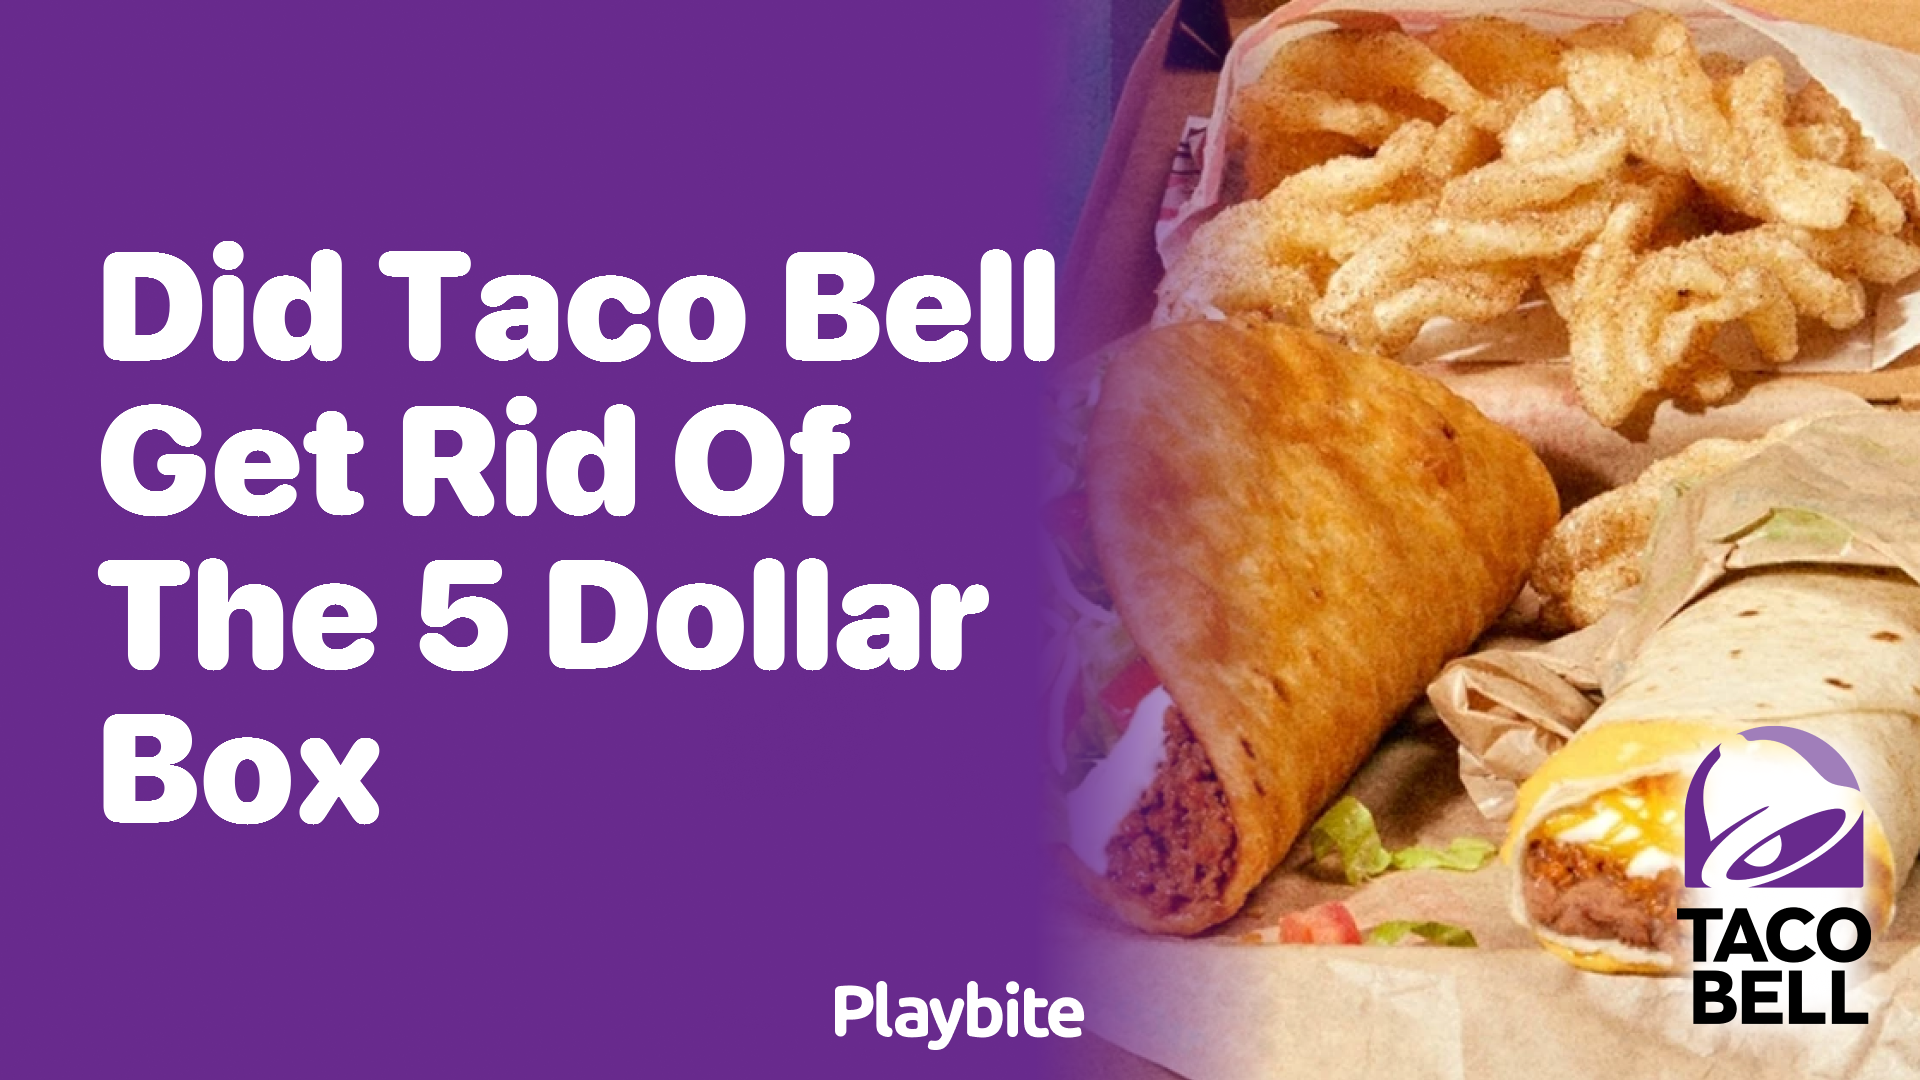 Did Taco Bell Get Rid of the $5 Box?